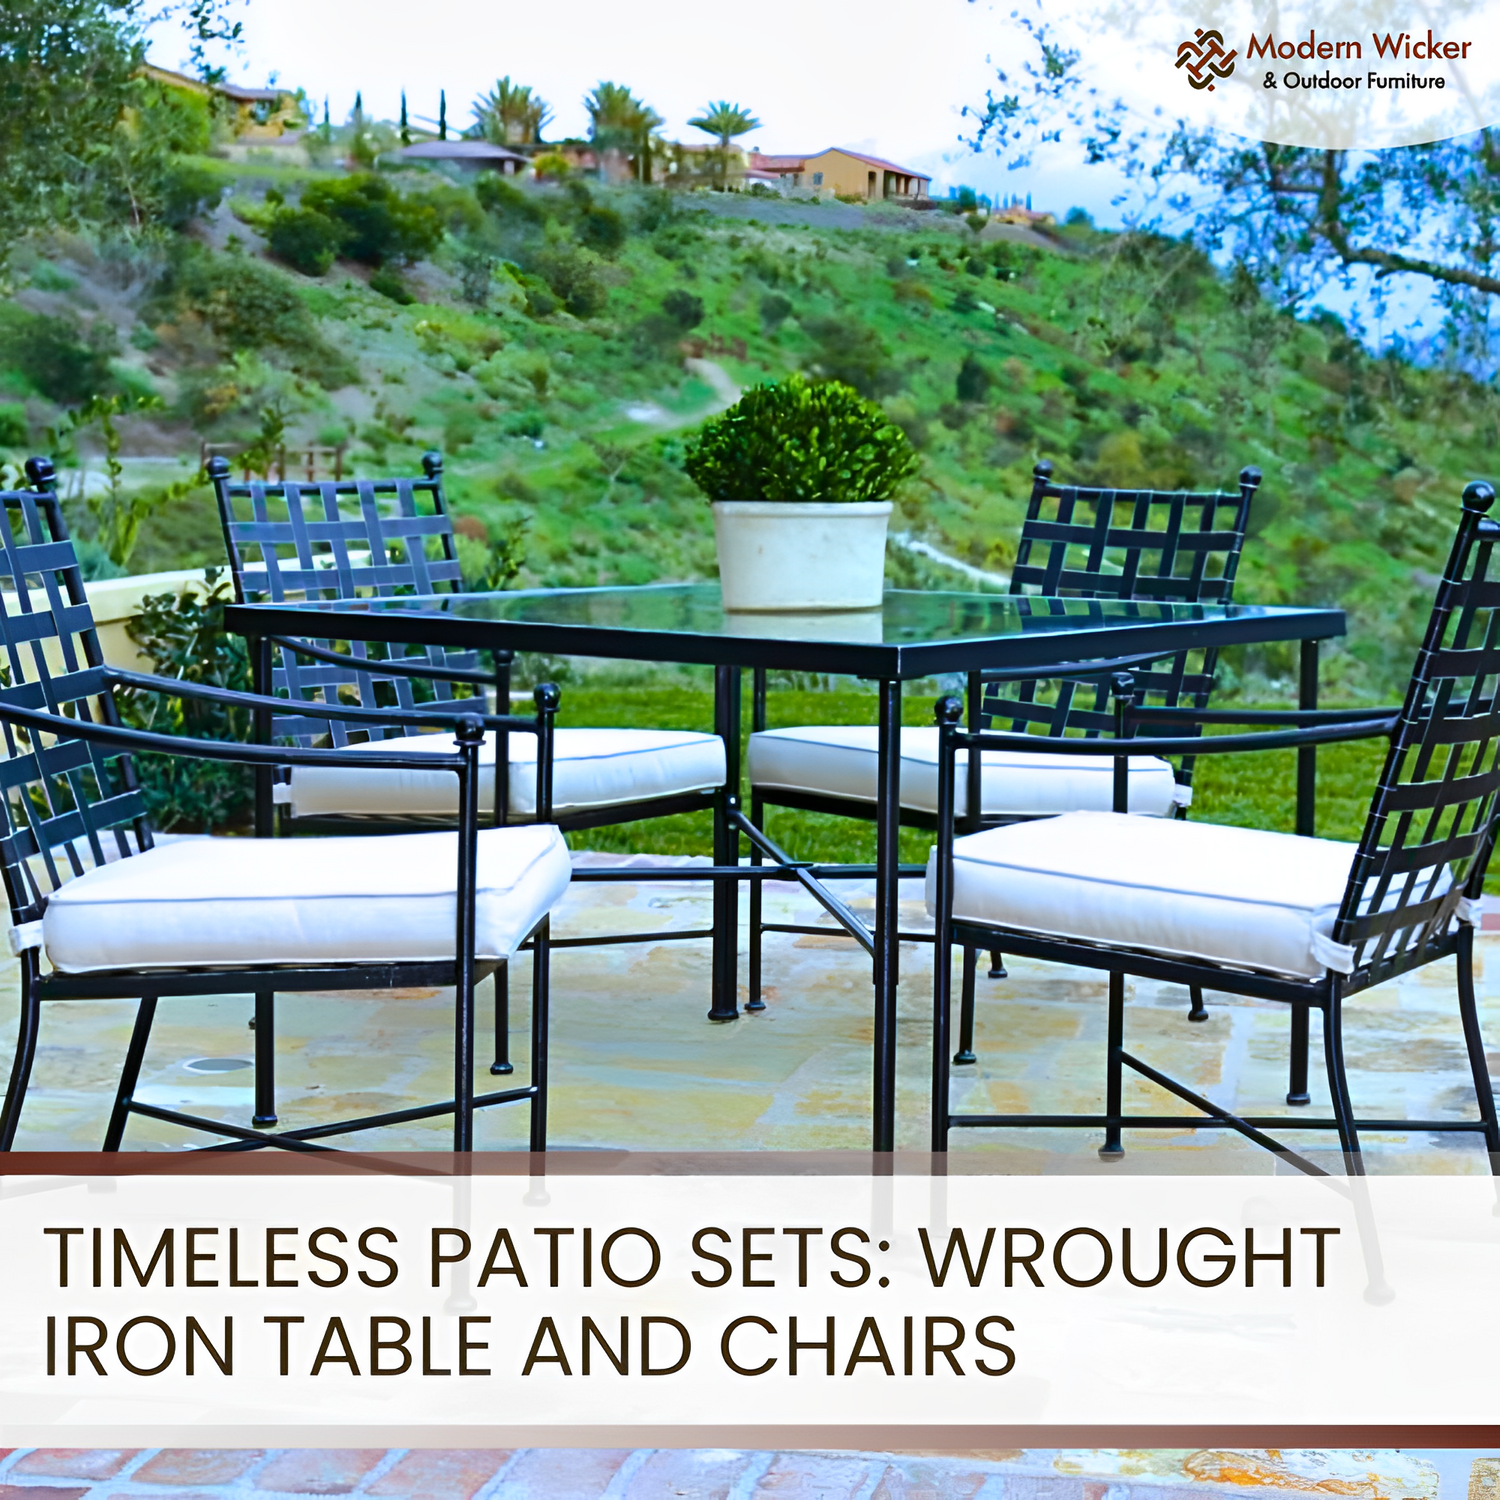 Timeless Patio Sets: Wrought Iron Table and Chairs